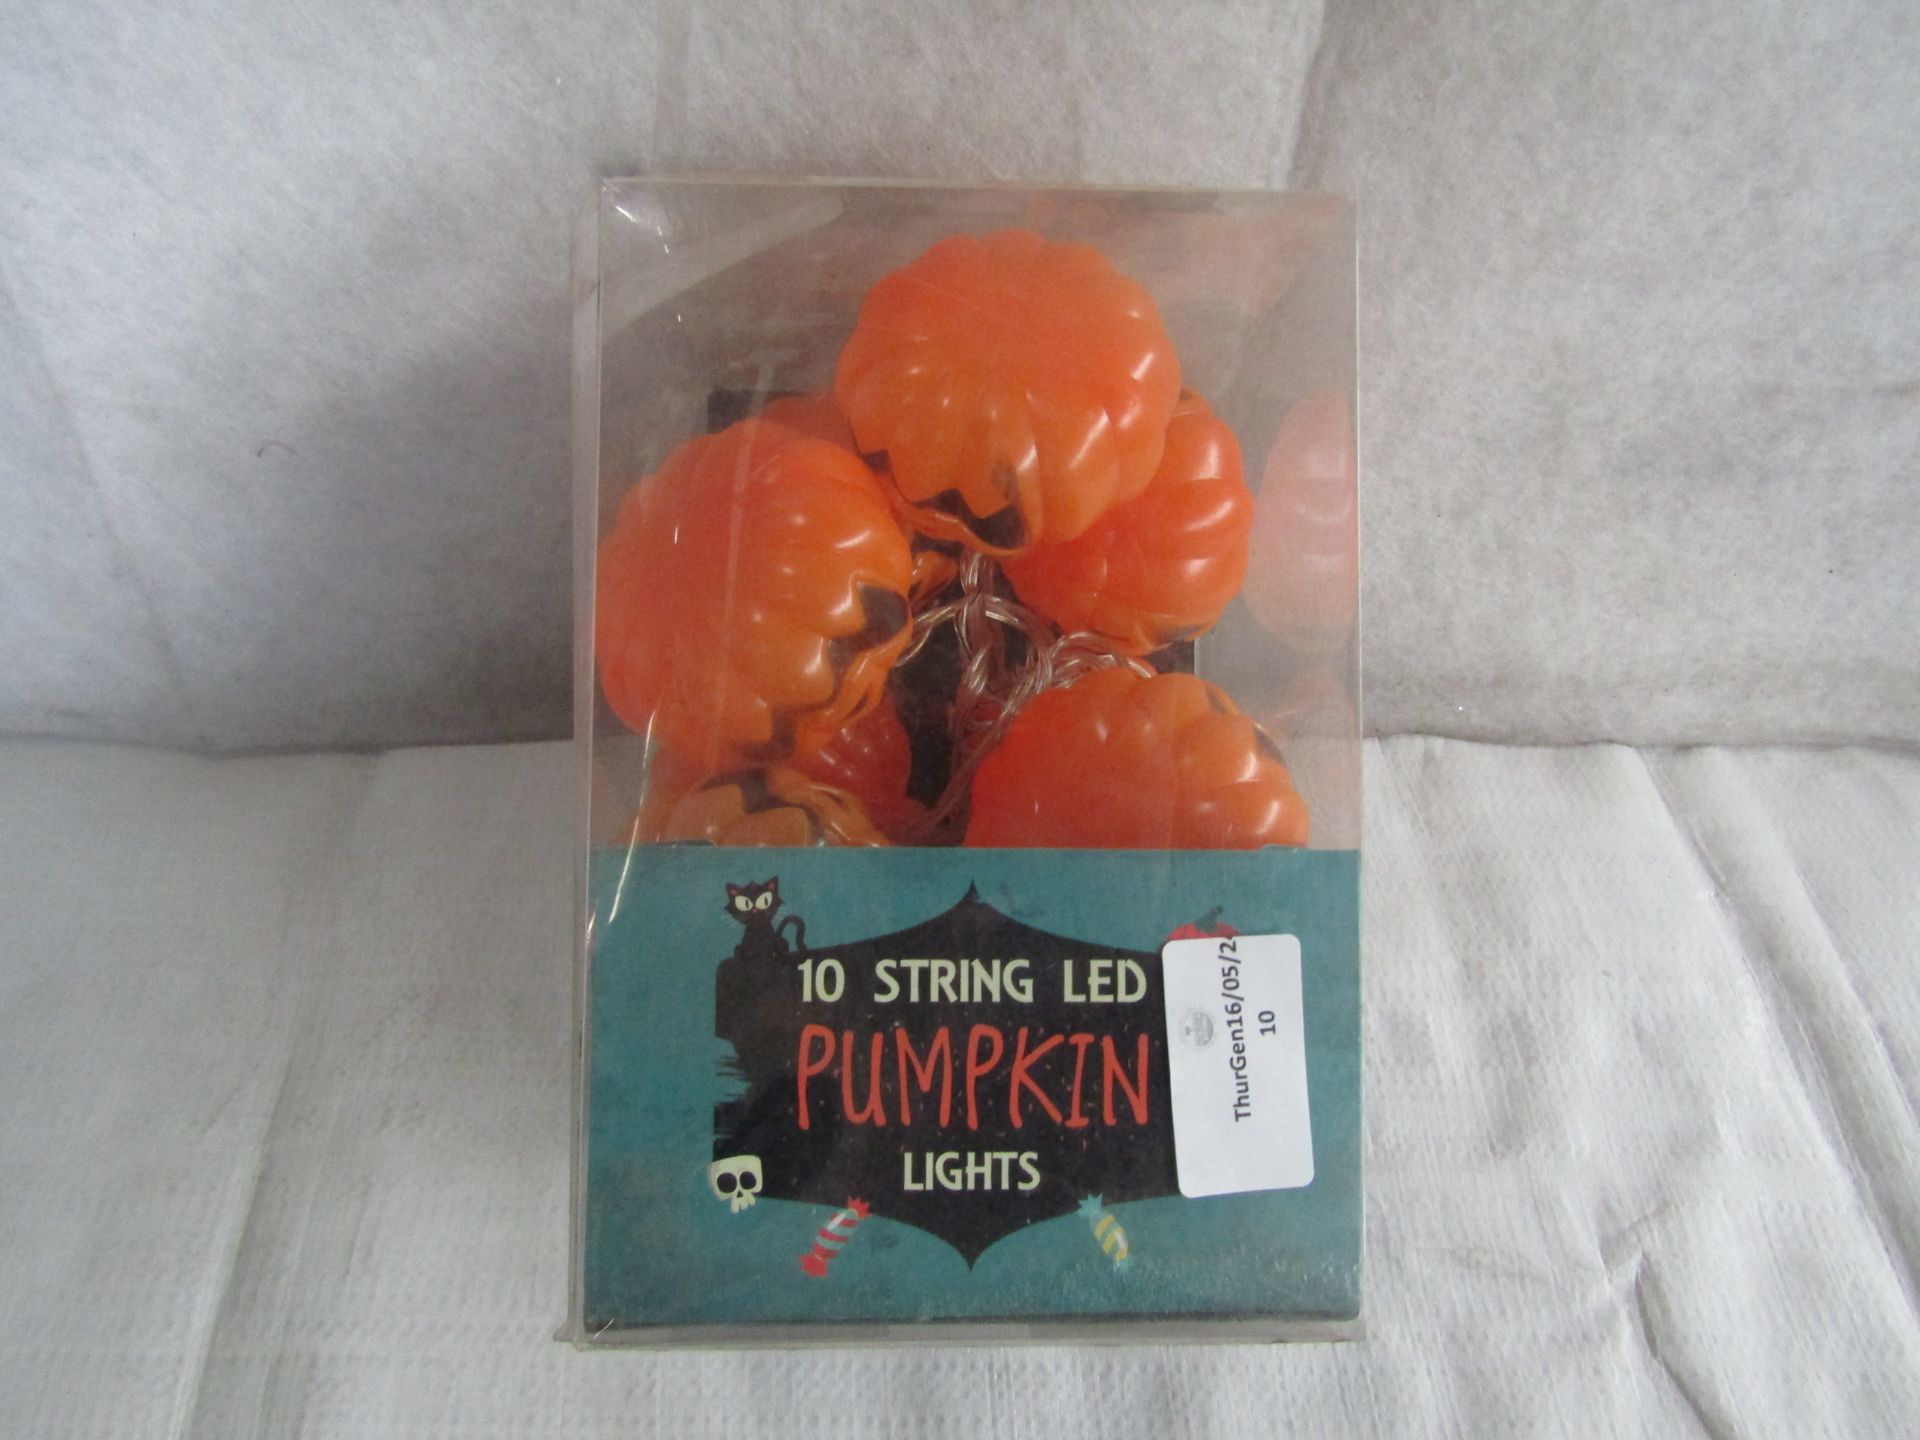 3X Set of 10 LED Pumpkin String Lights - Unchecked & Packaged.